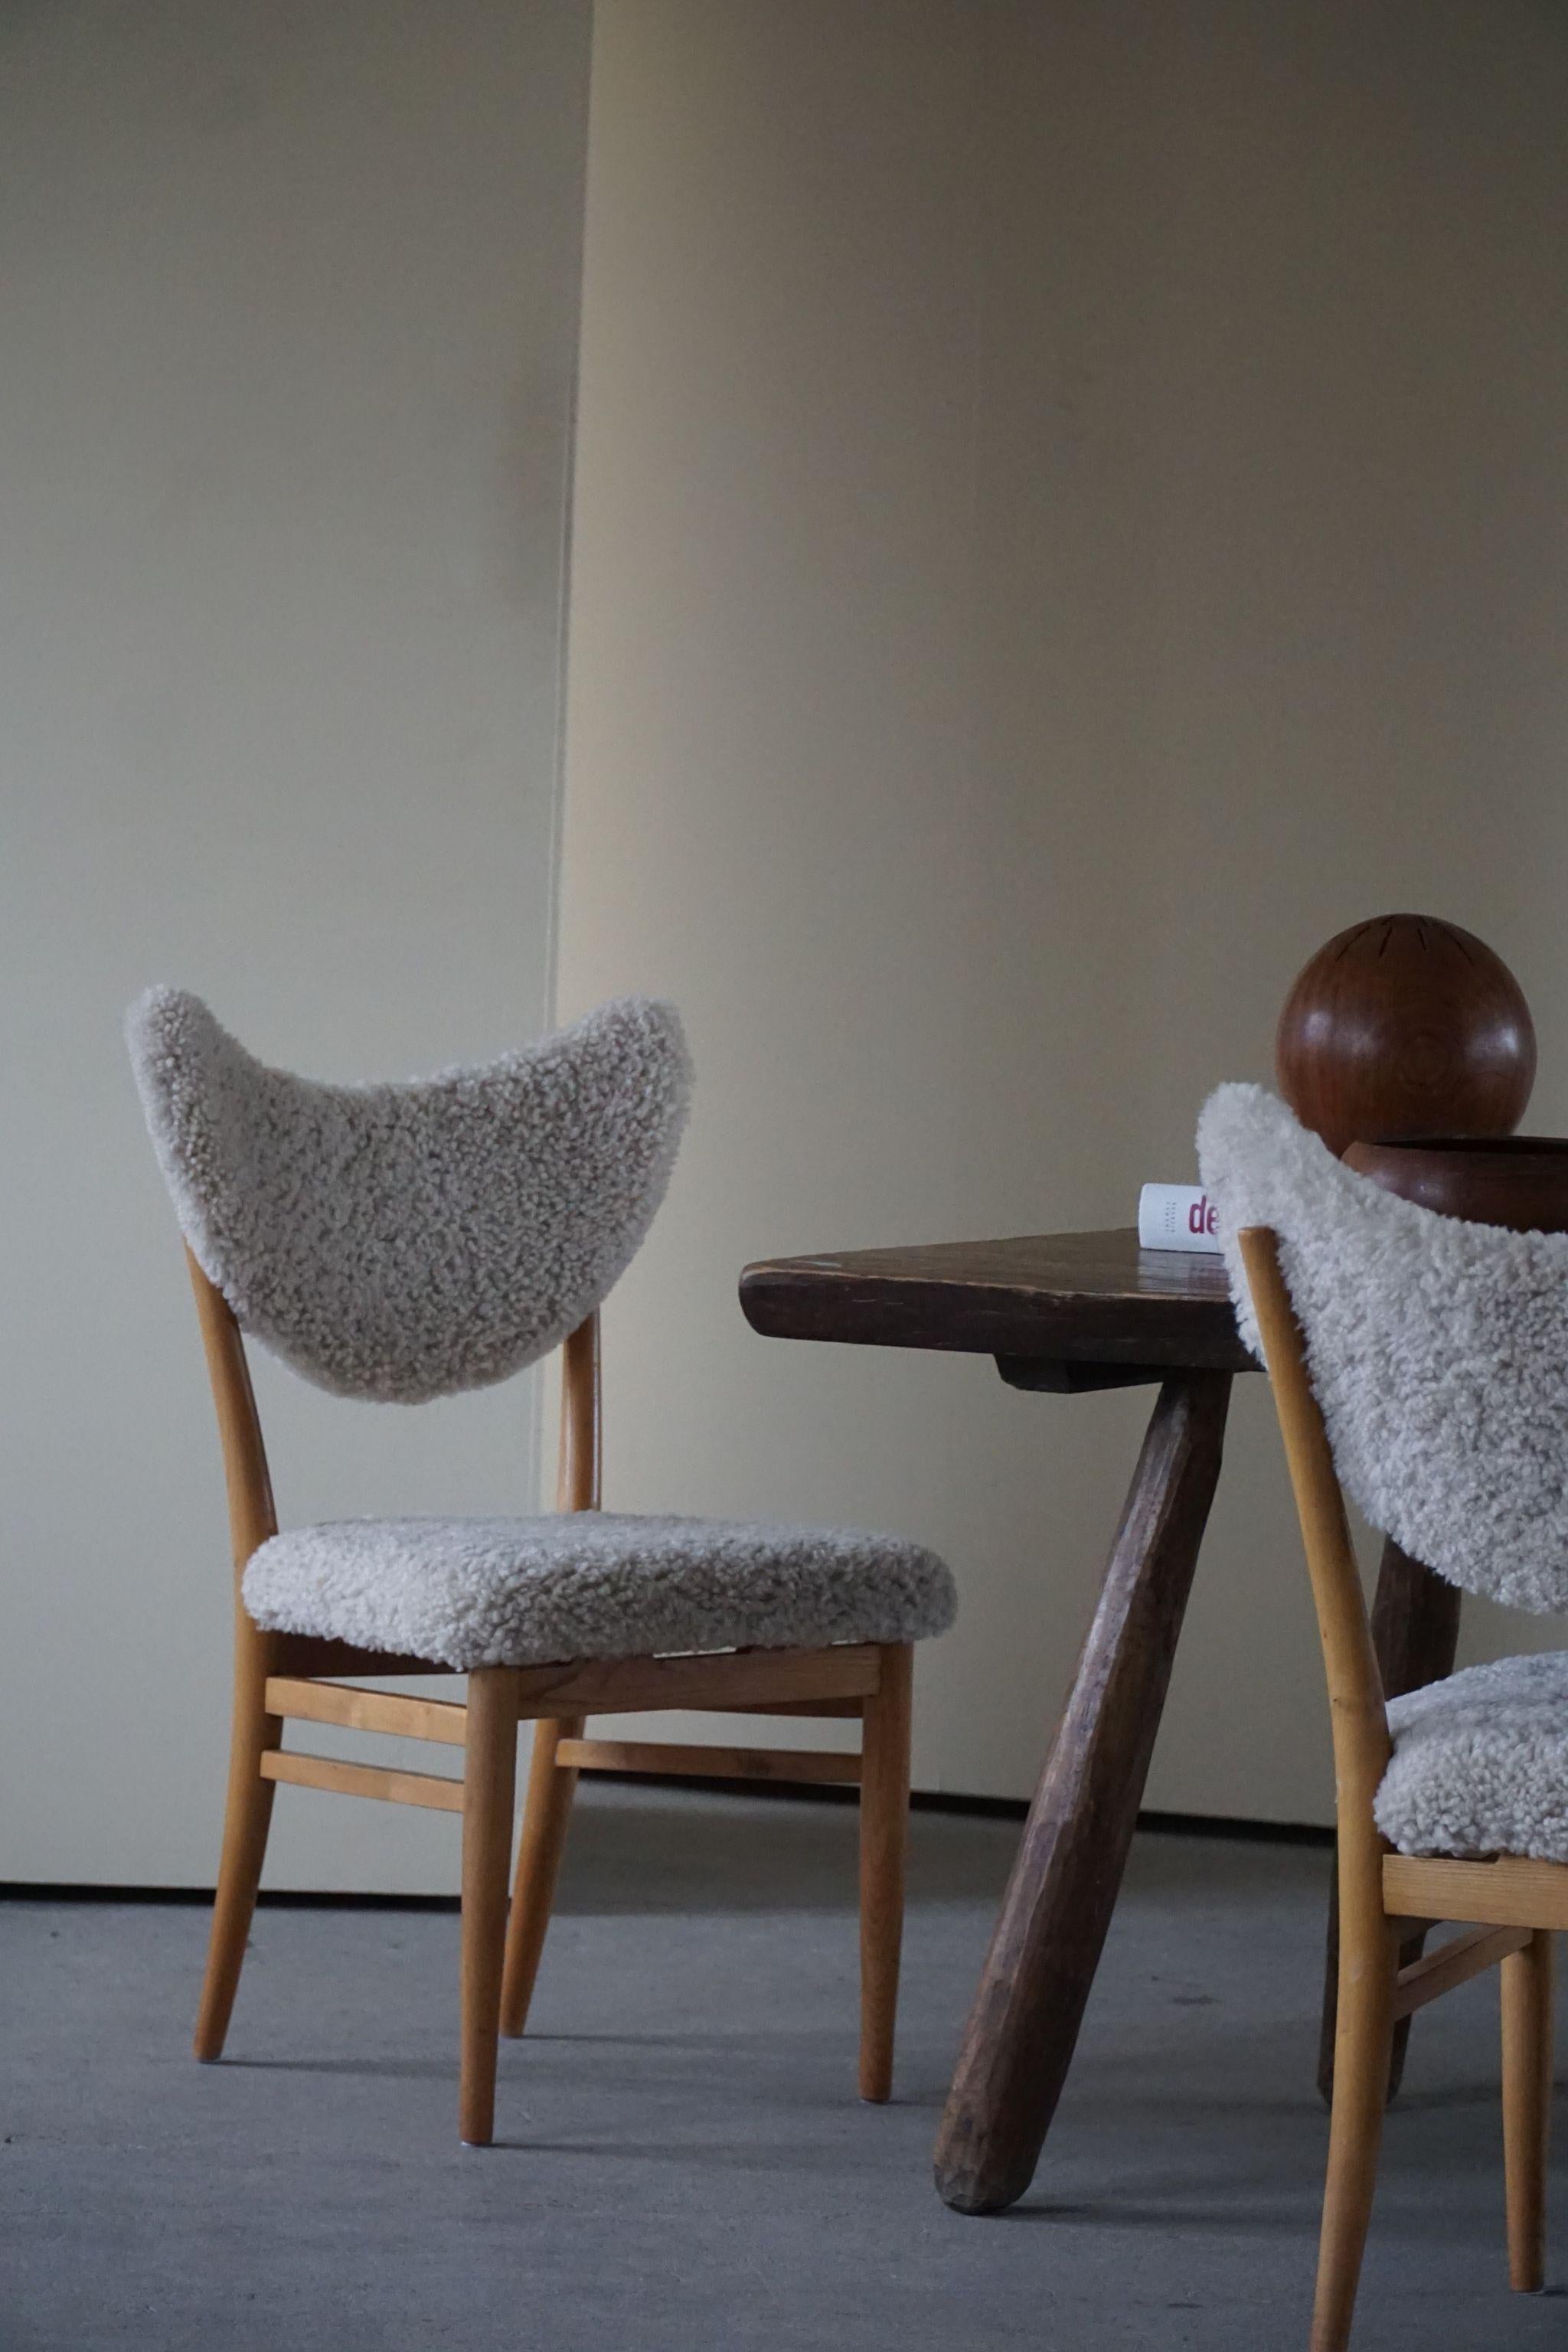 Lambskin Hvidt & Mølgaard, Set of 4 Chairs in Ash, Reupholstered in Lambswool, 1950s For Sale